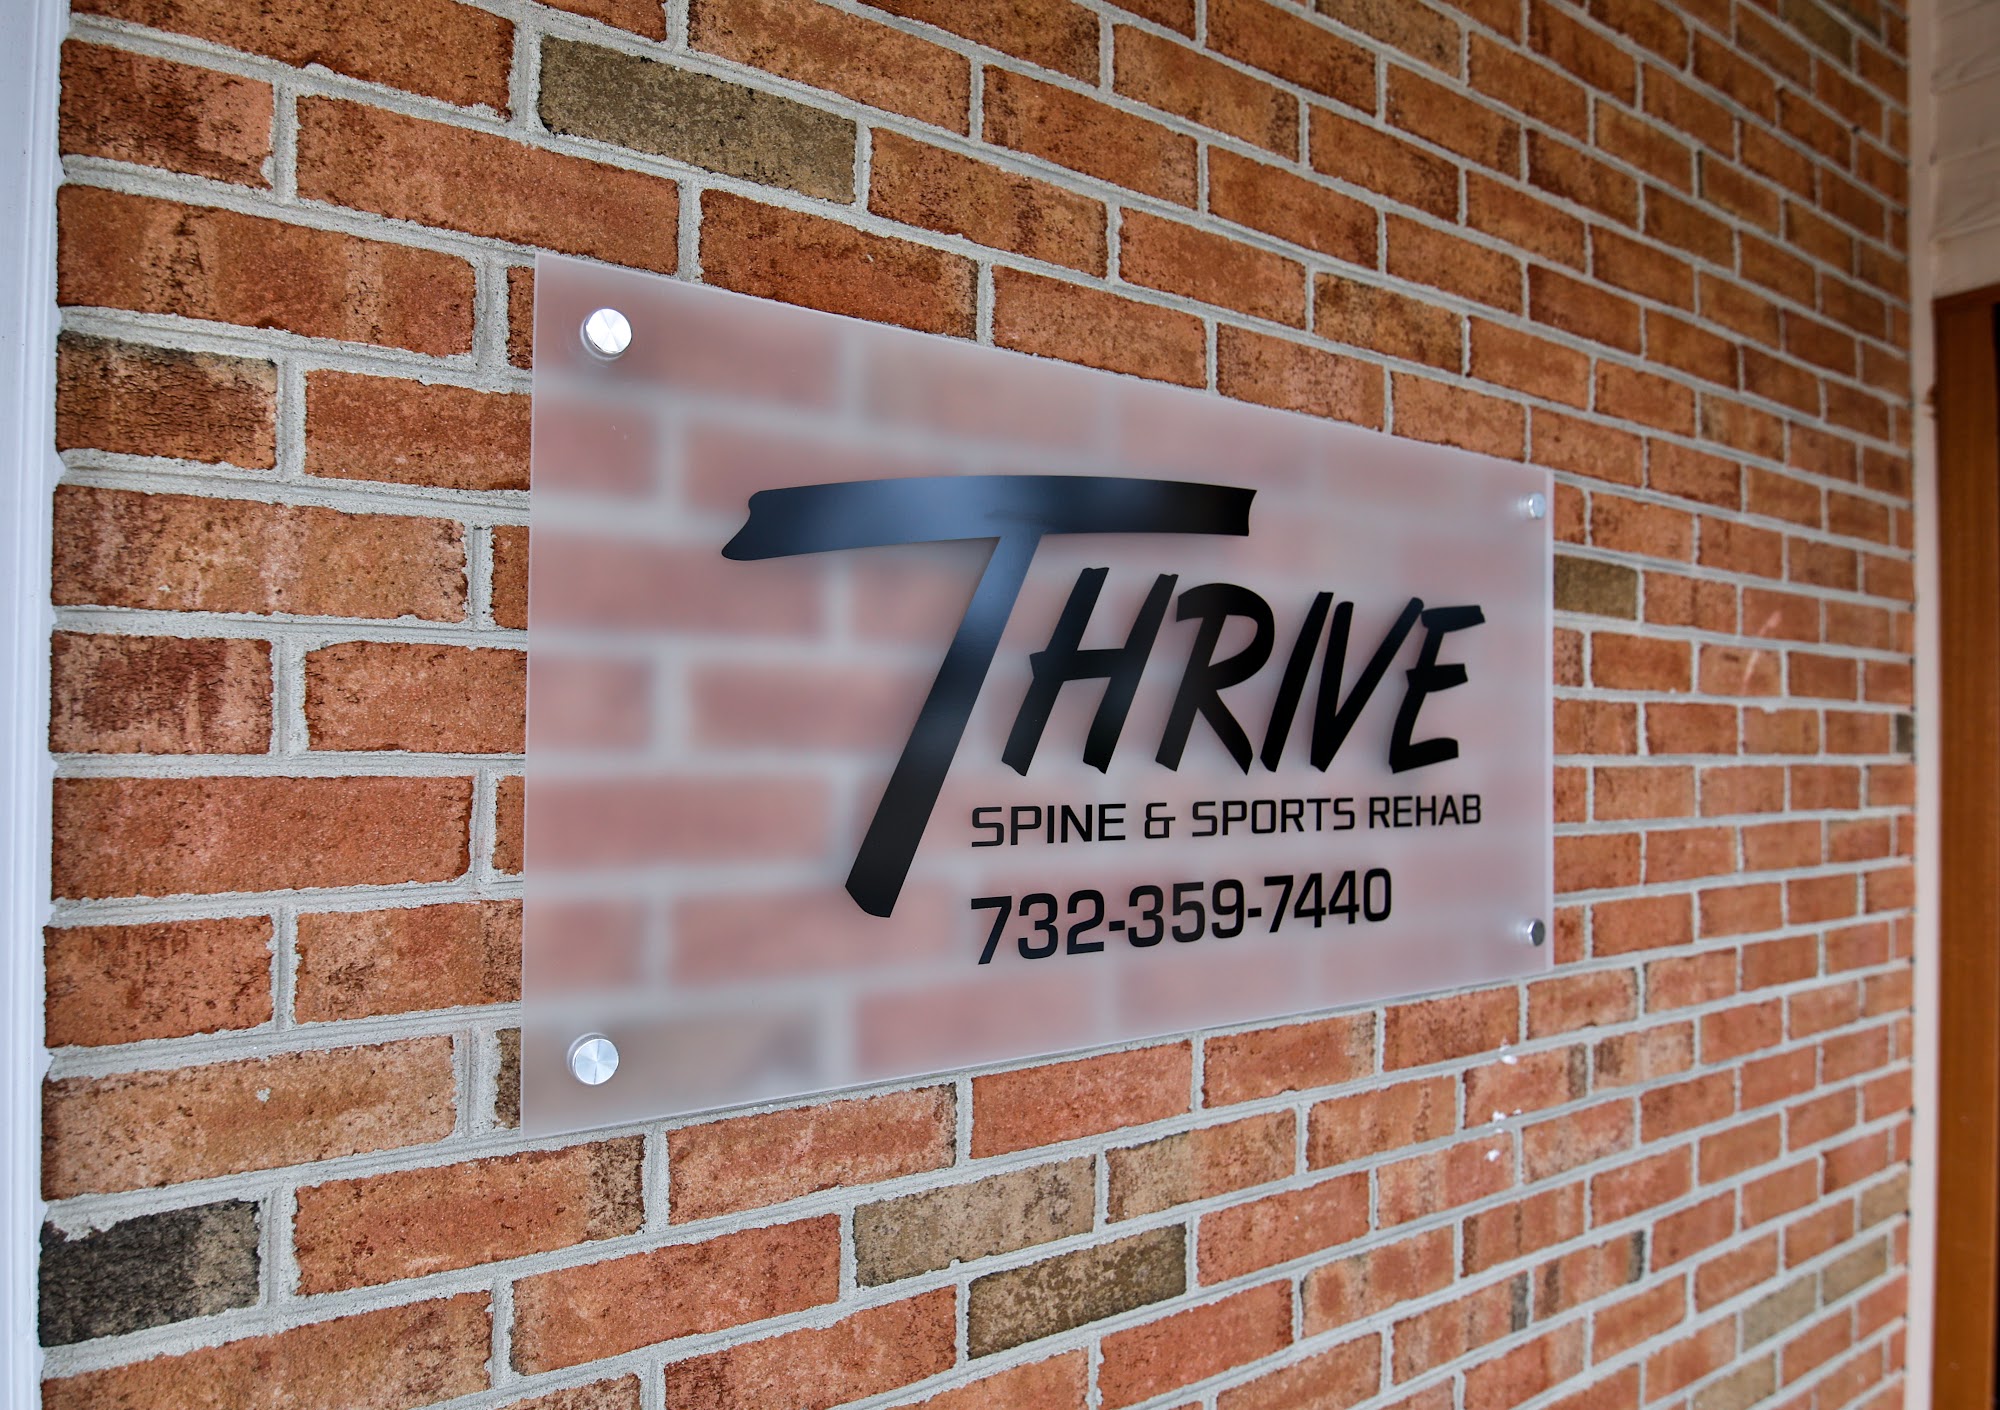 Thrive Spine & Sports Rehab 616 Fifth Ave Suite 105, Belmar New Jersey 07719